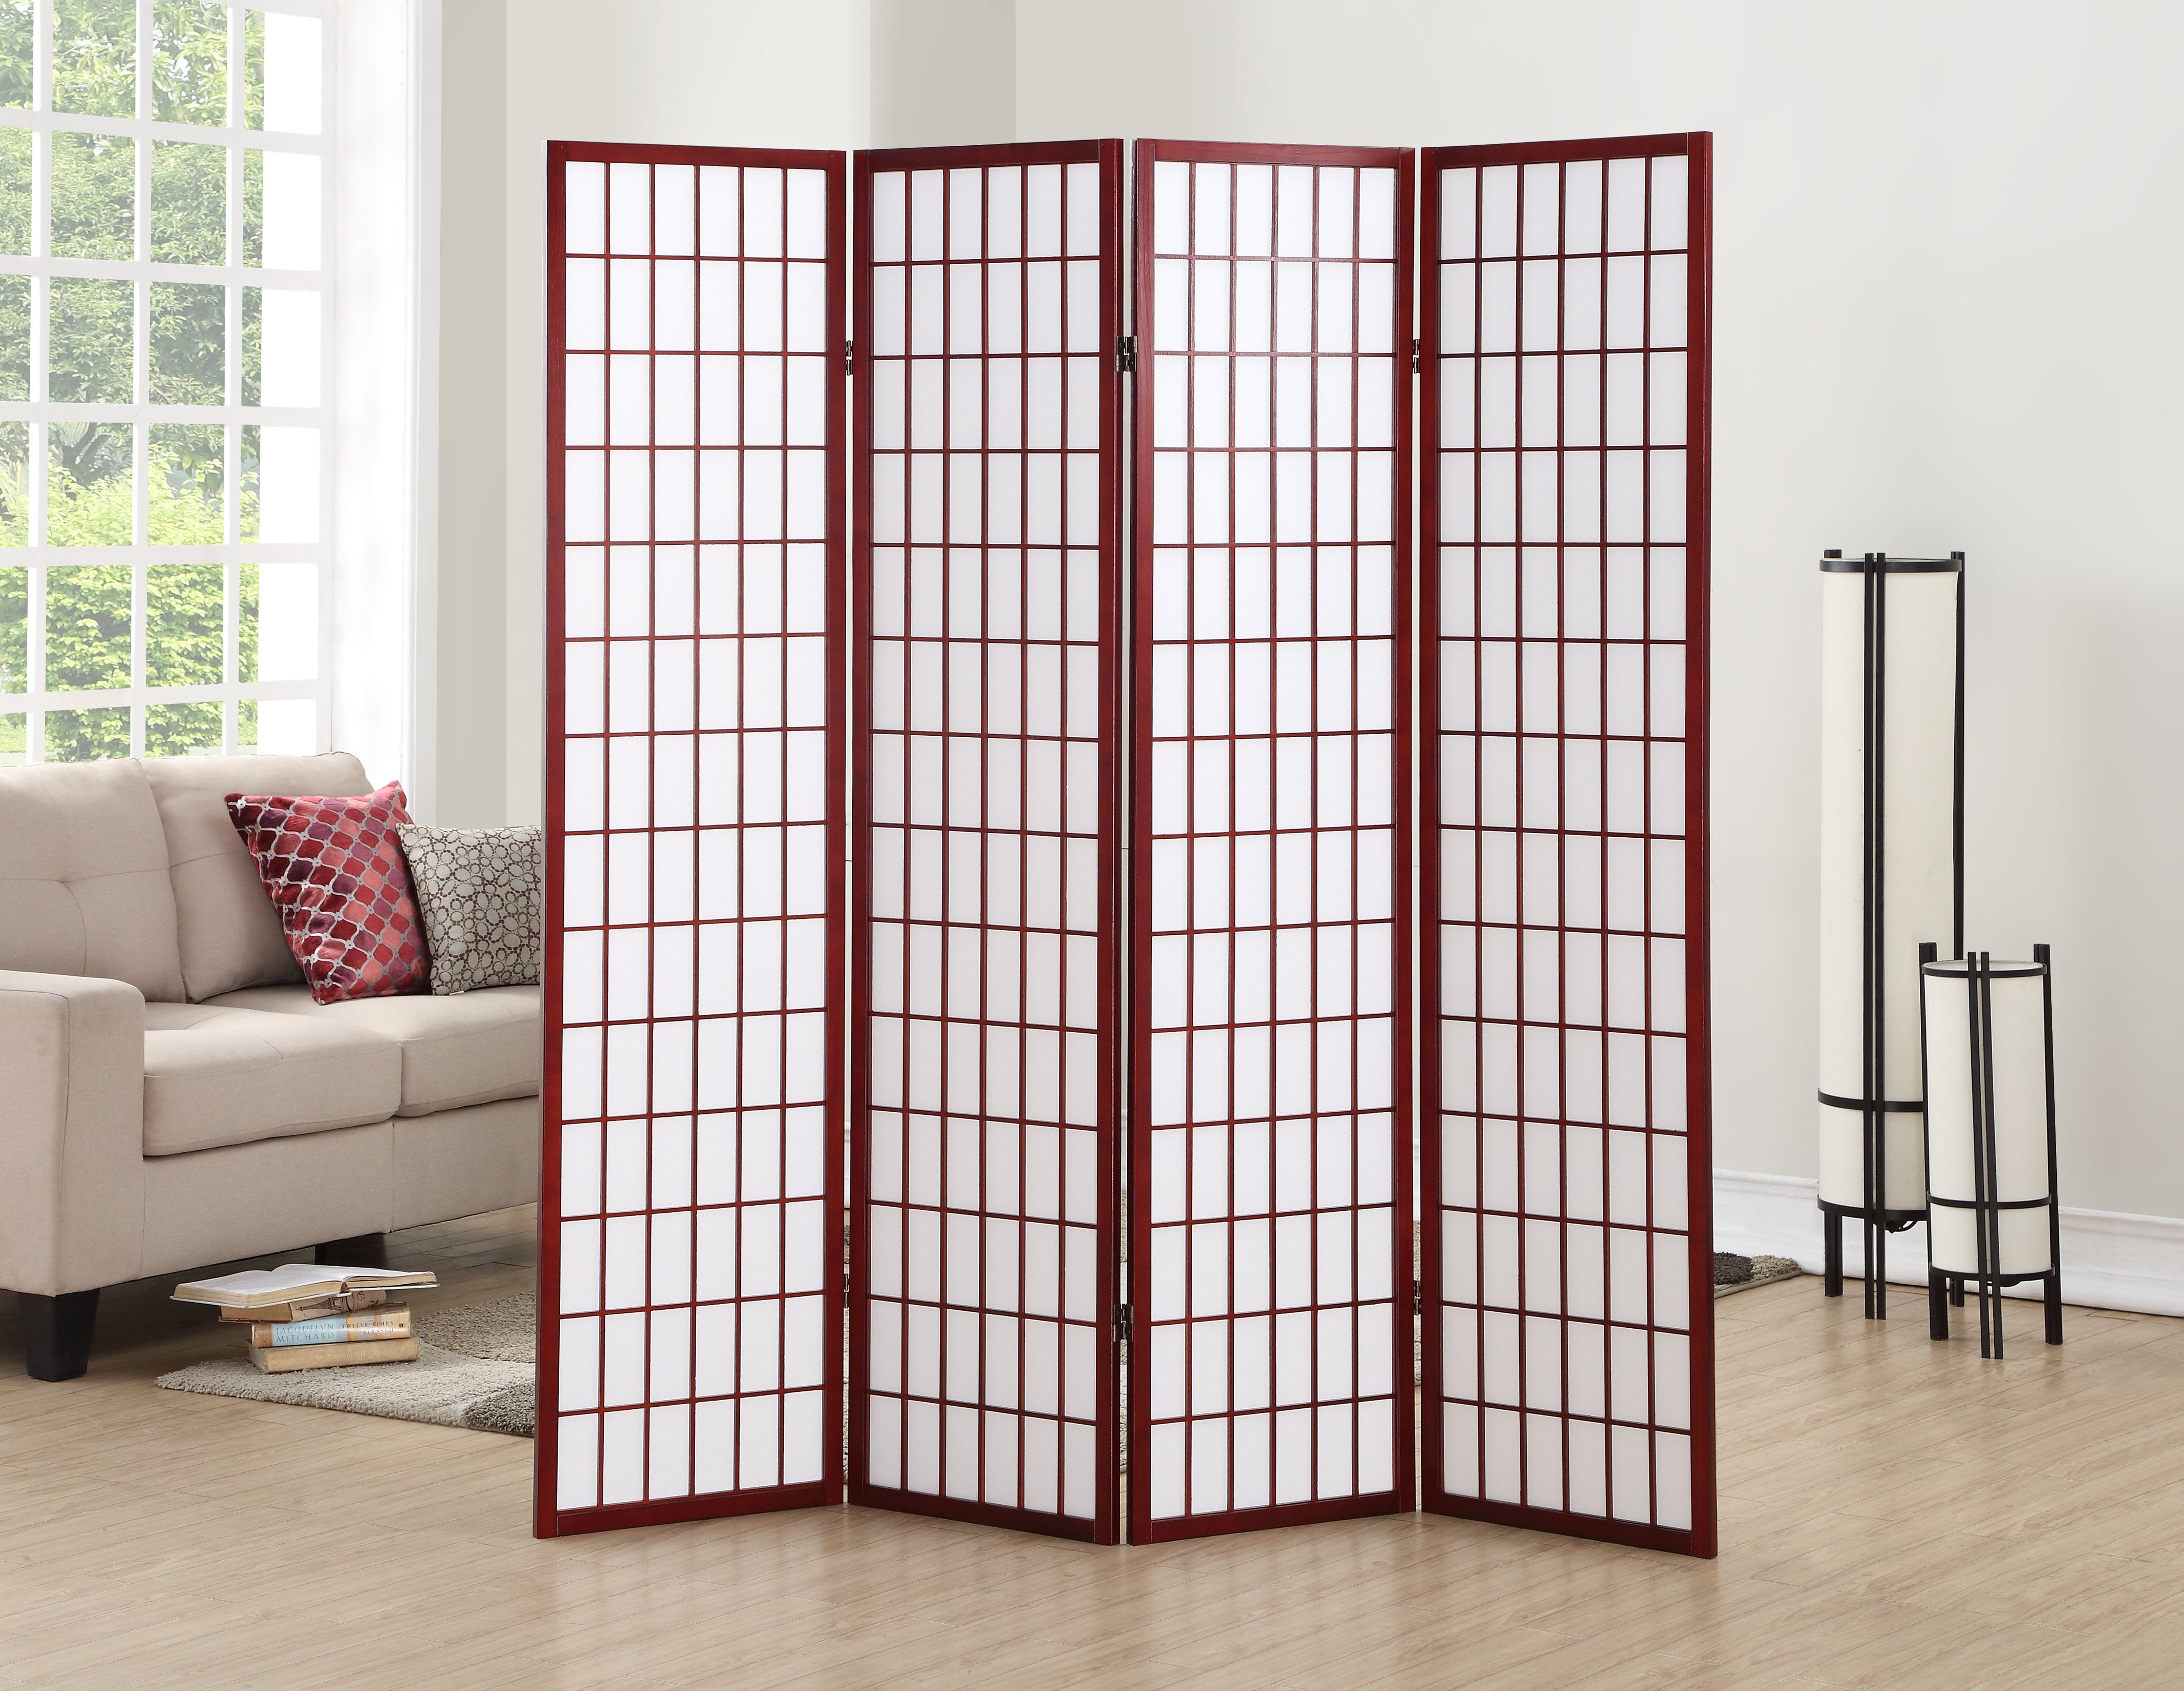 Japanese Room Divider: How to Style It for Any Interior Design!